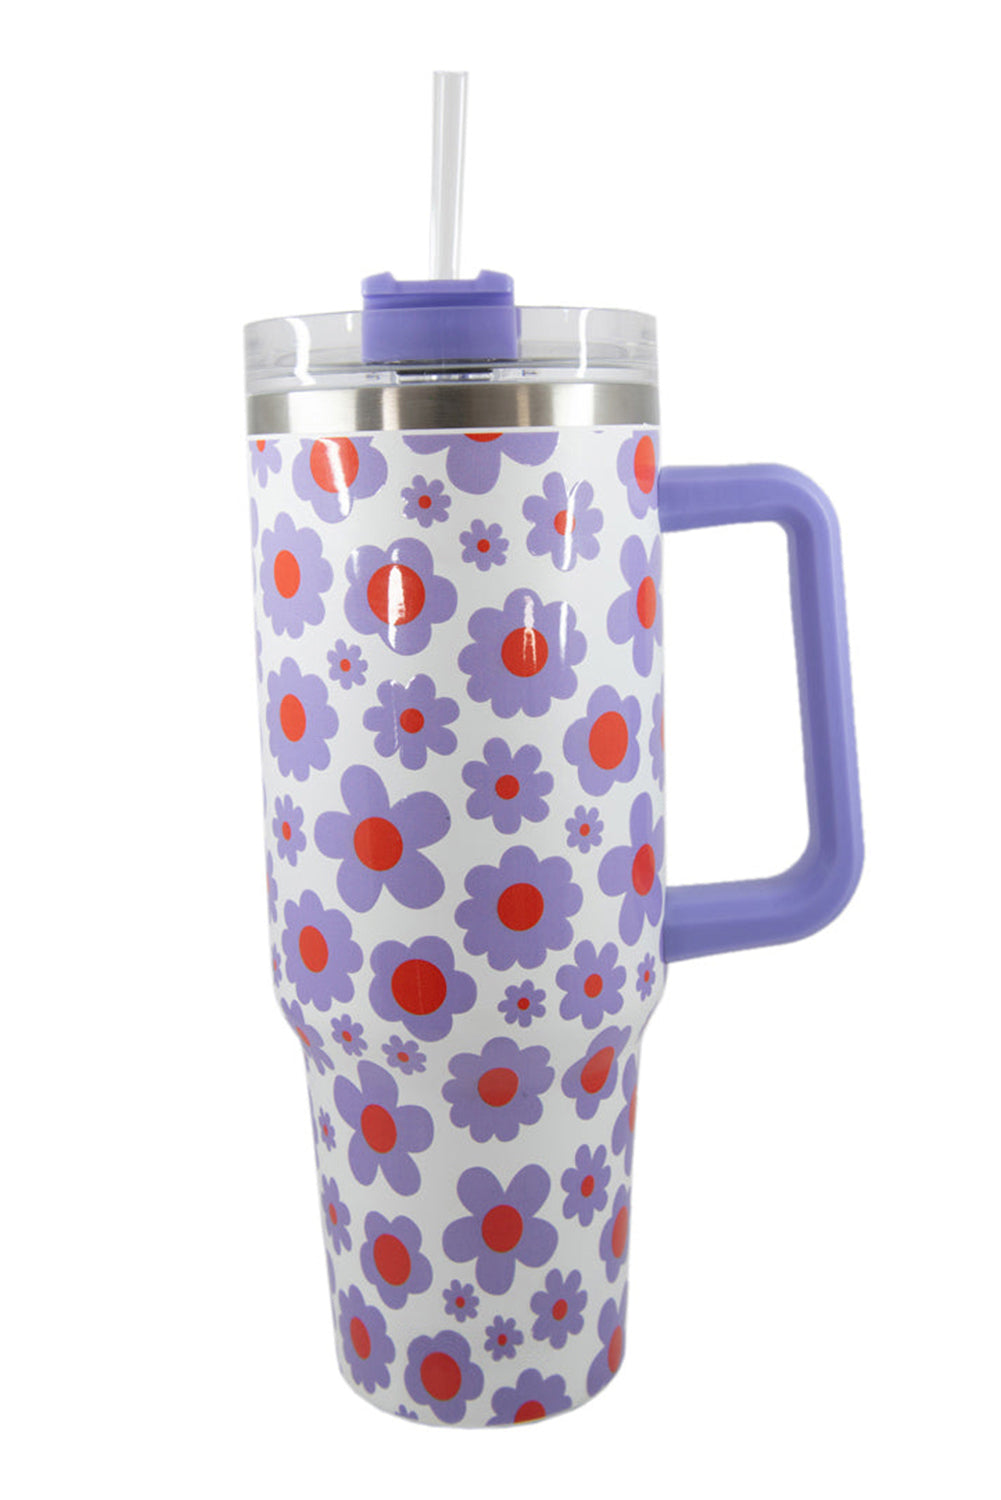 Orchid Petal Flower Print Handle Stainless Steel Portable Cup